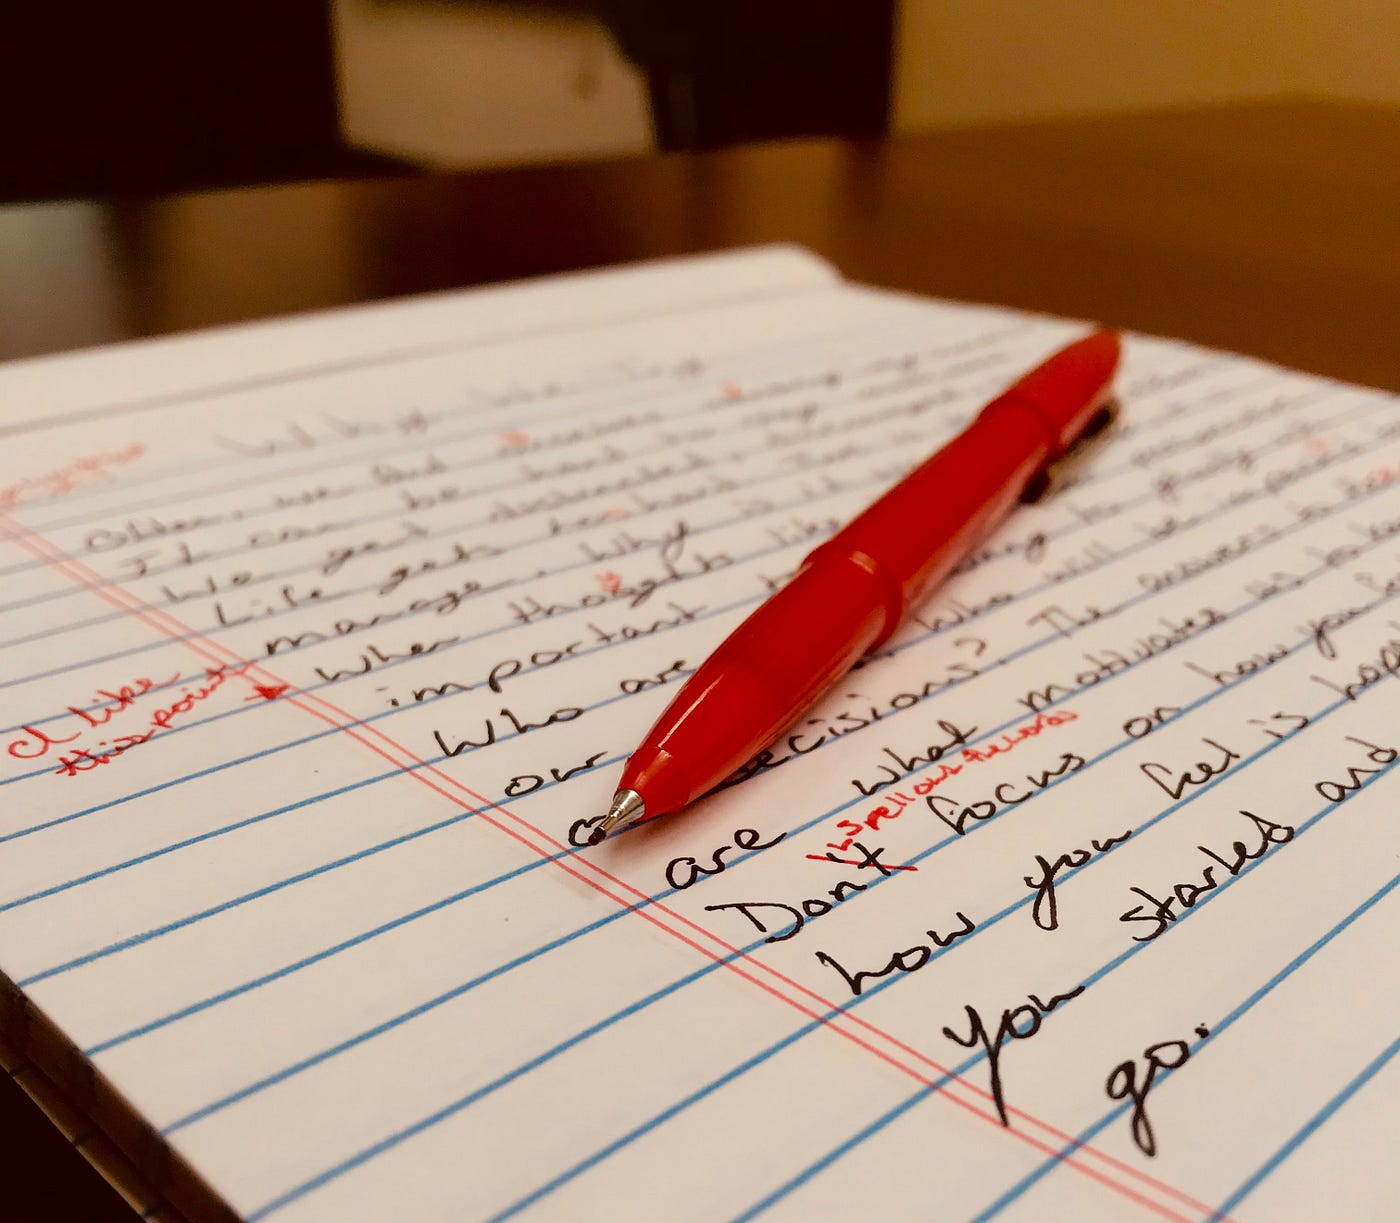 The Red Pen of Correction. We all know the red ink pen that marked…, by  Diana Xavier